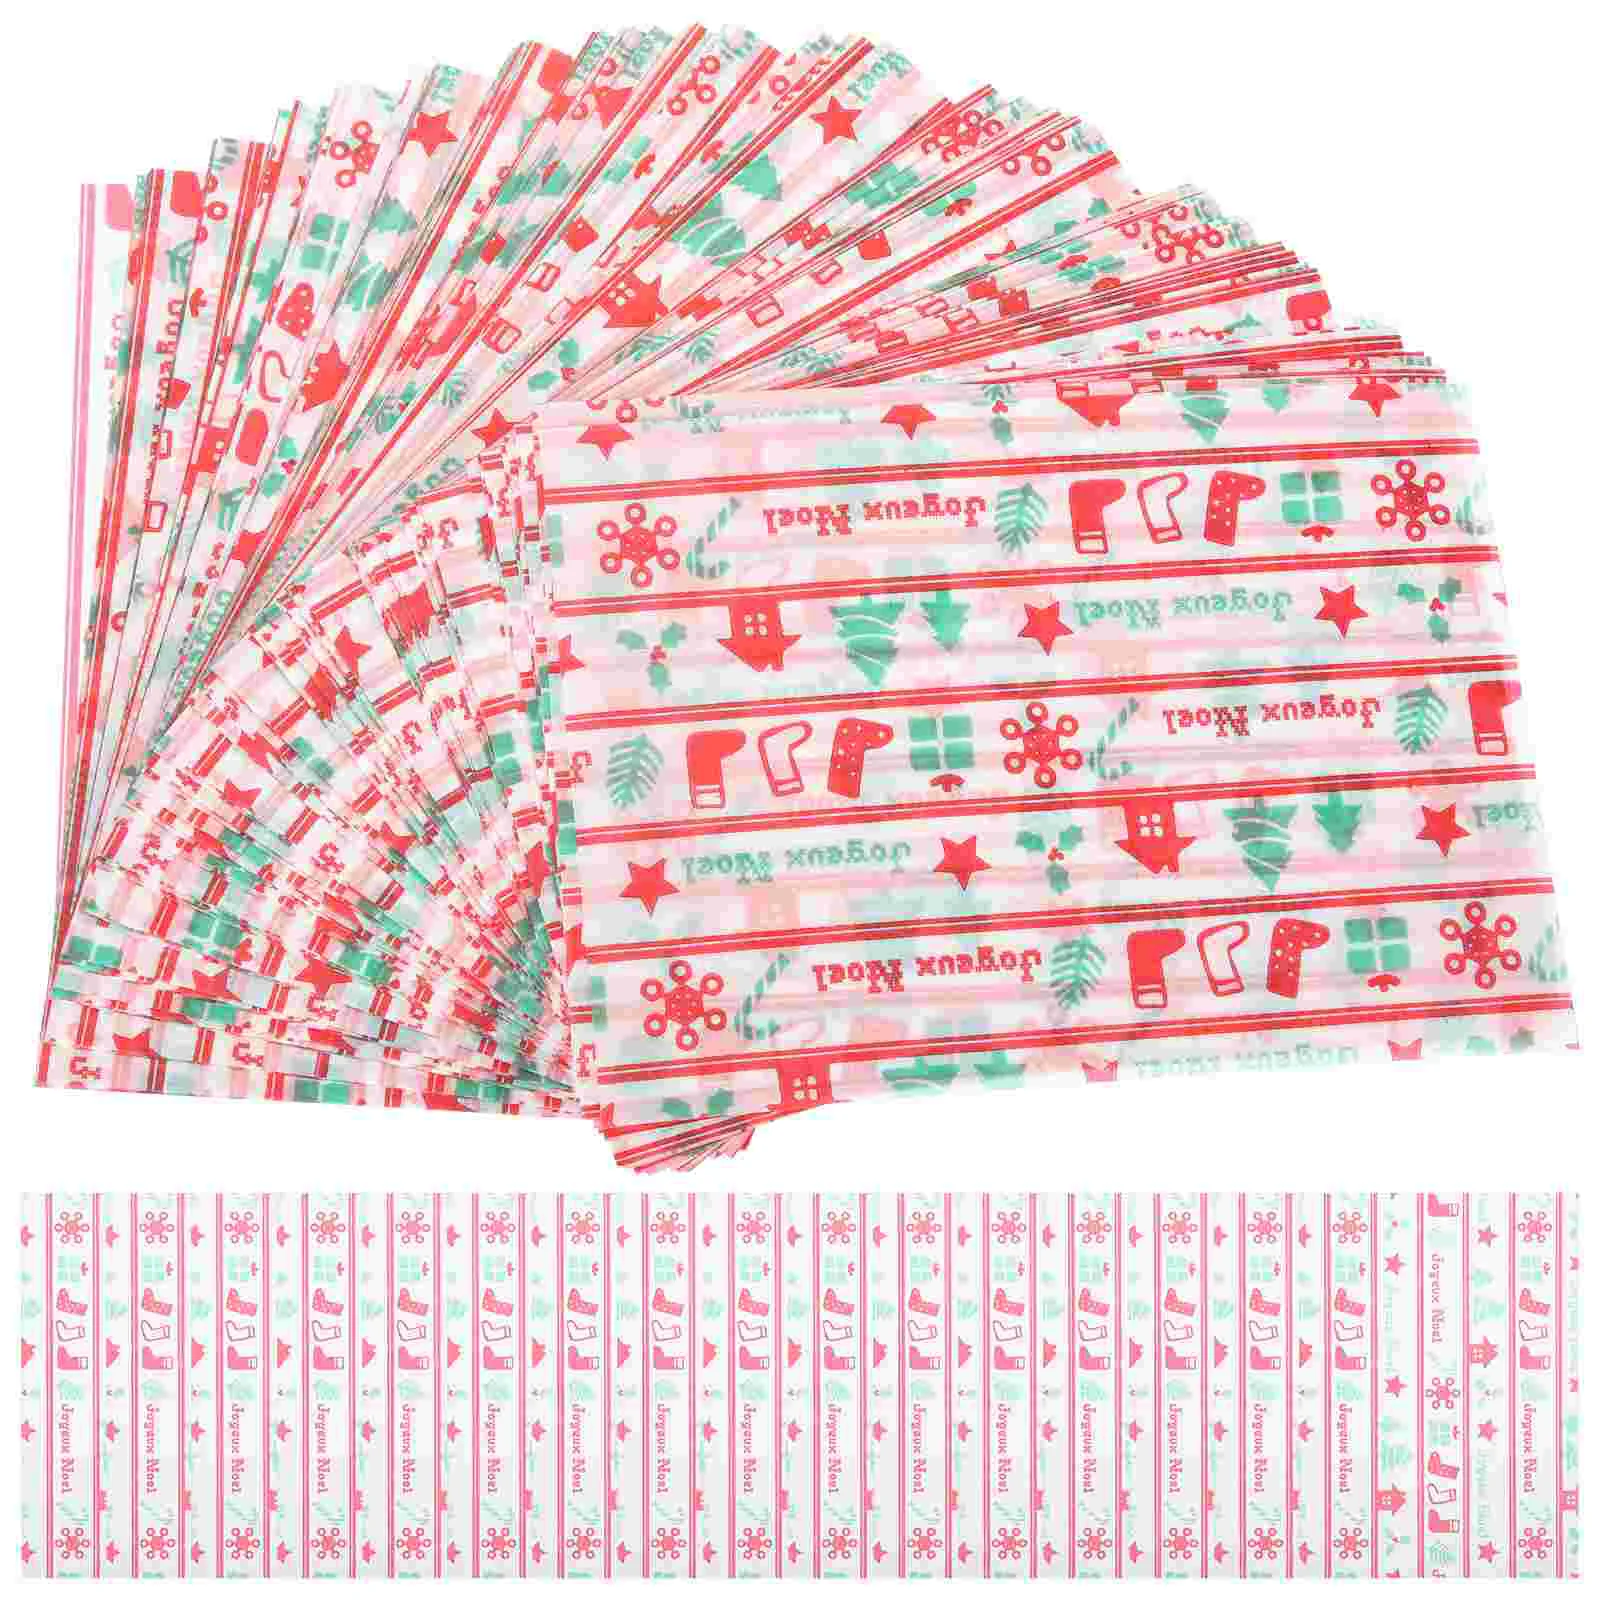 

500 Sheets Nougat Wrappers Candy Wrapping Paper Chocolate Sweets Packing Xmas Christmas Treats